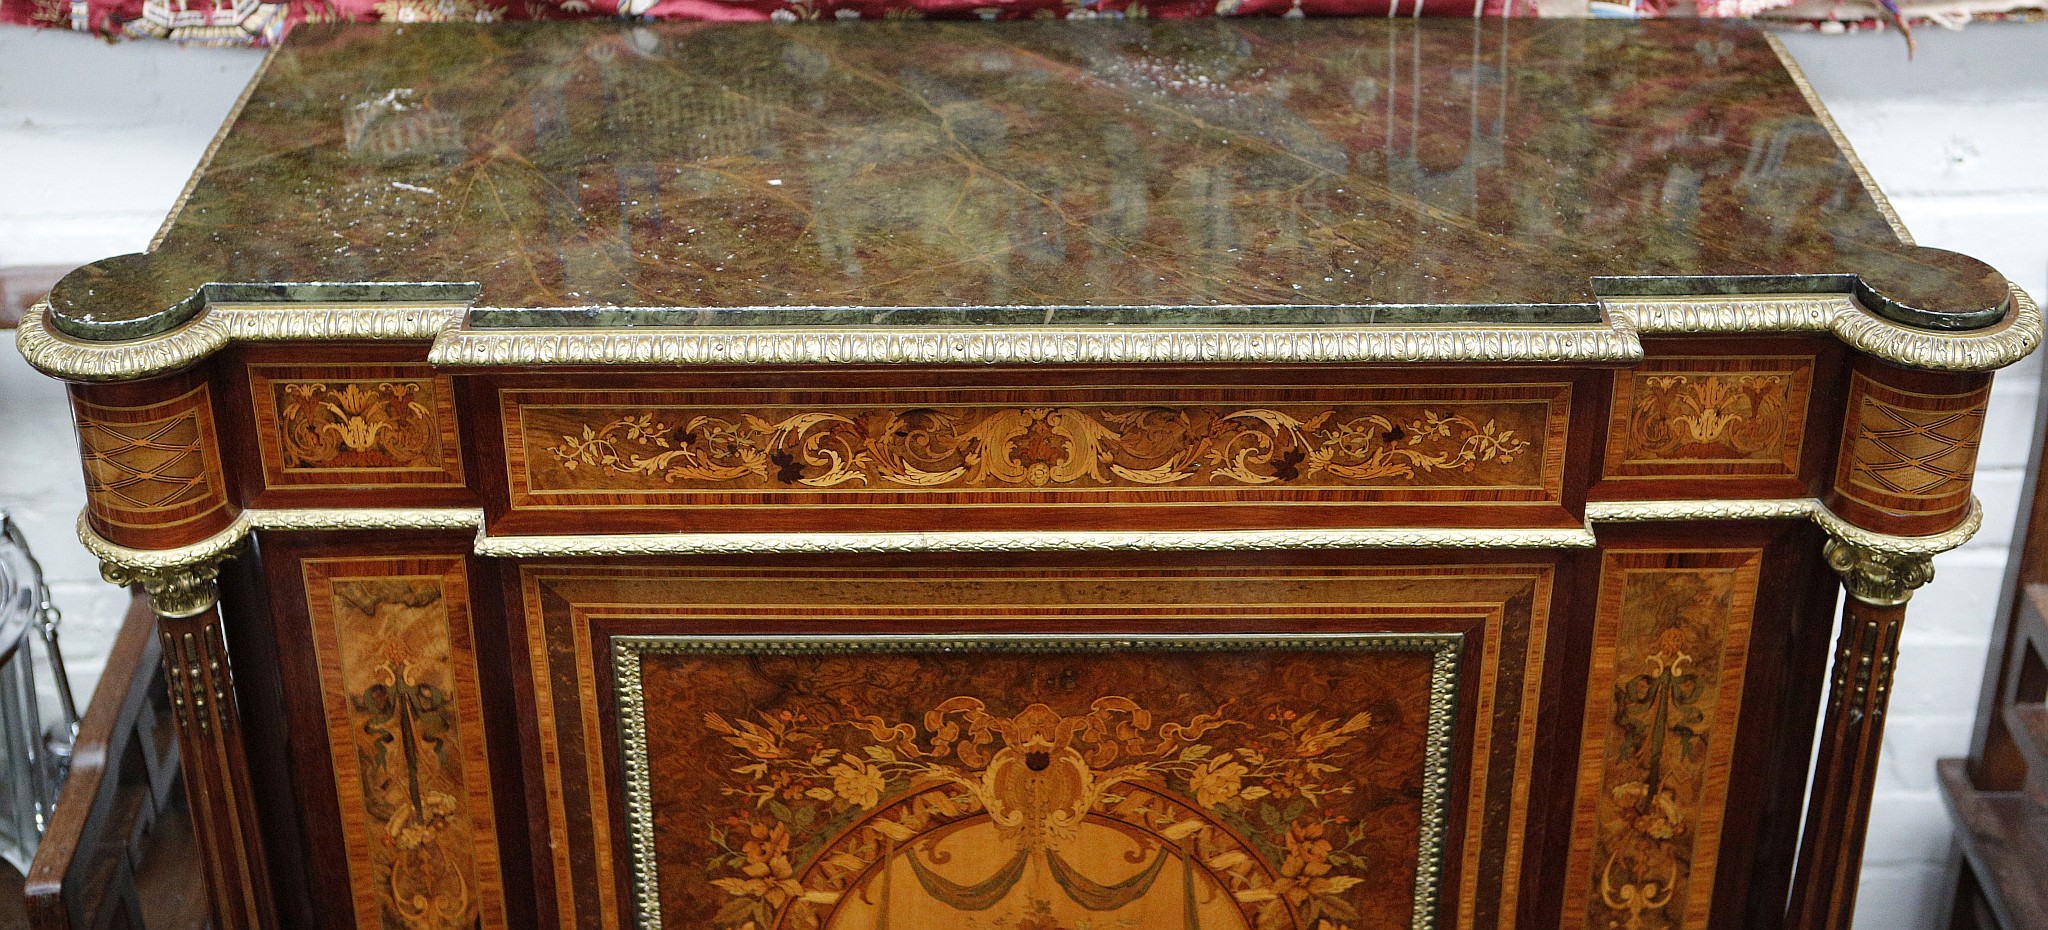 A fine 19th century ormolu mounted, marble topped pier cabinet, the front and sides profusely - Image 5 of 7